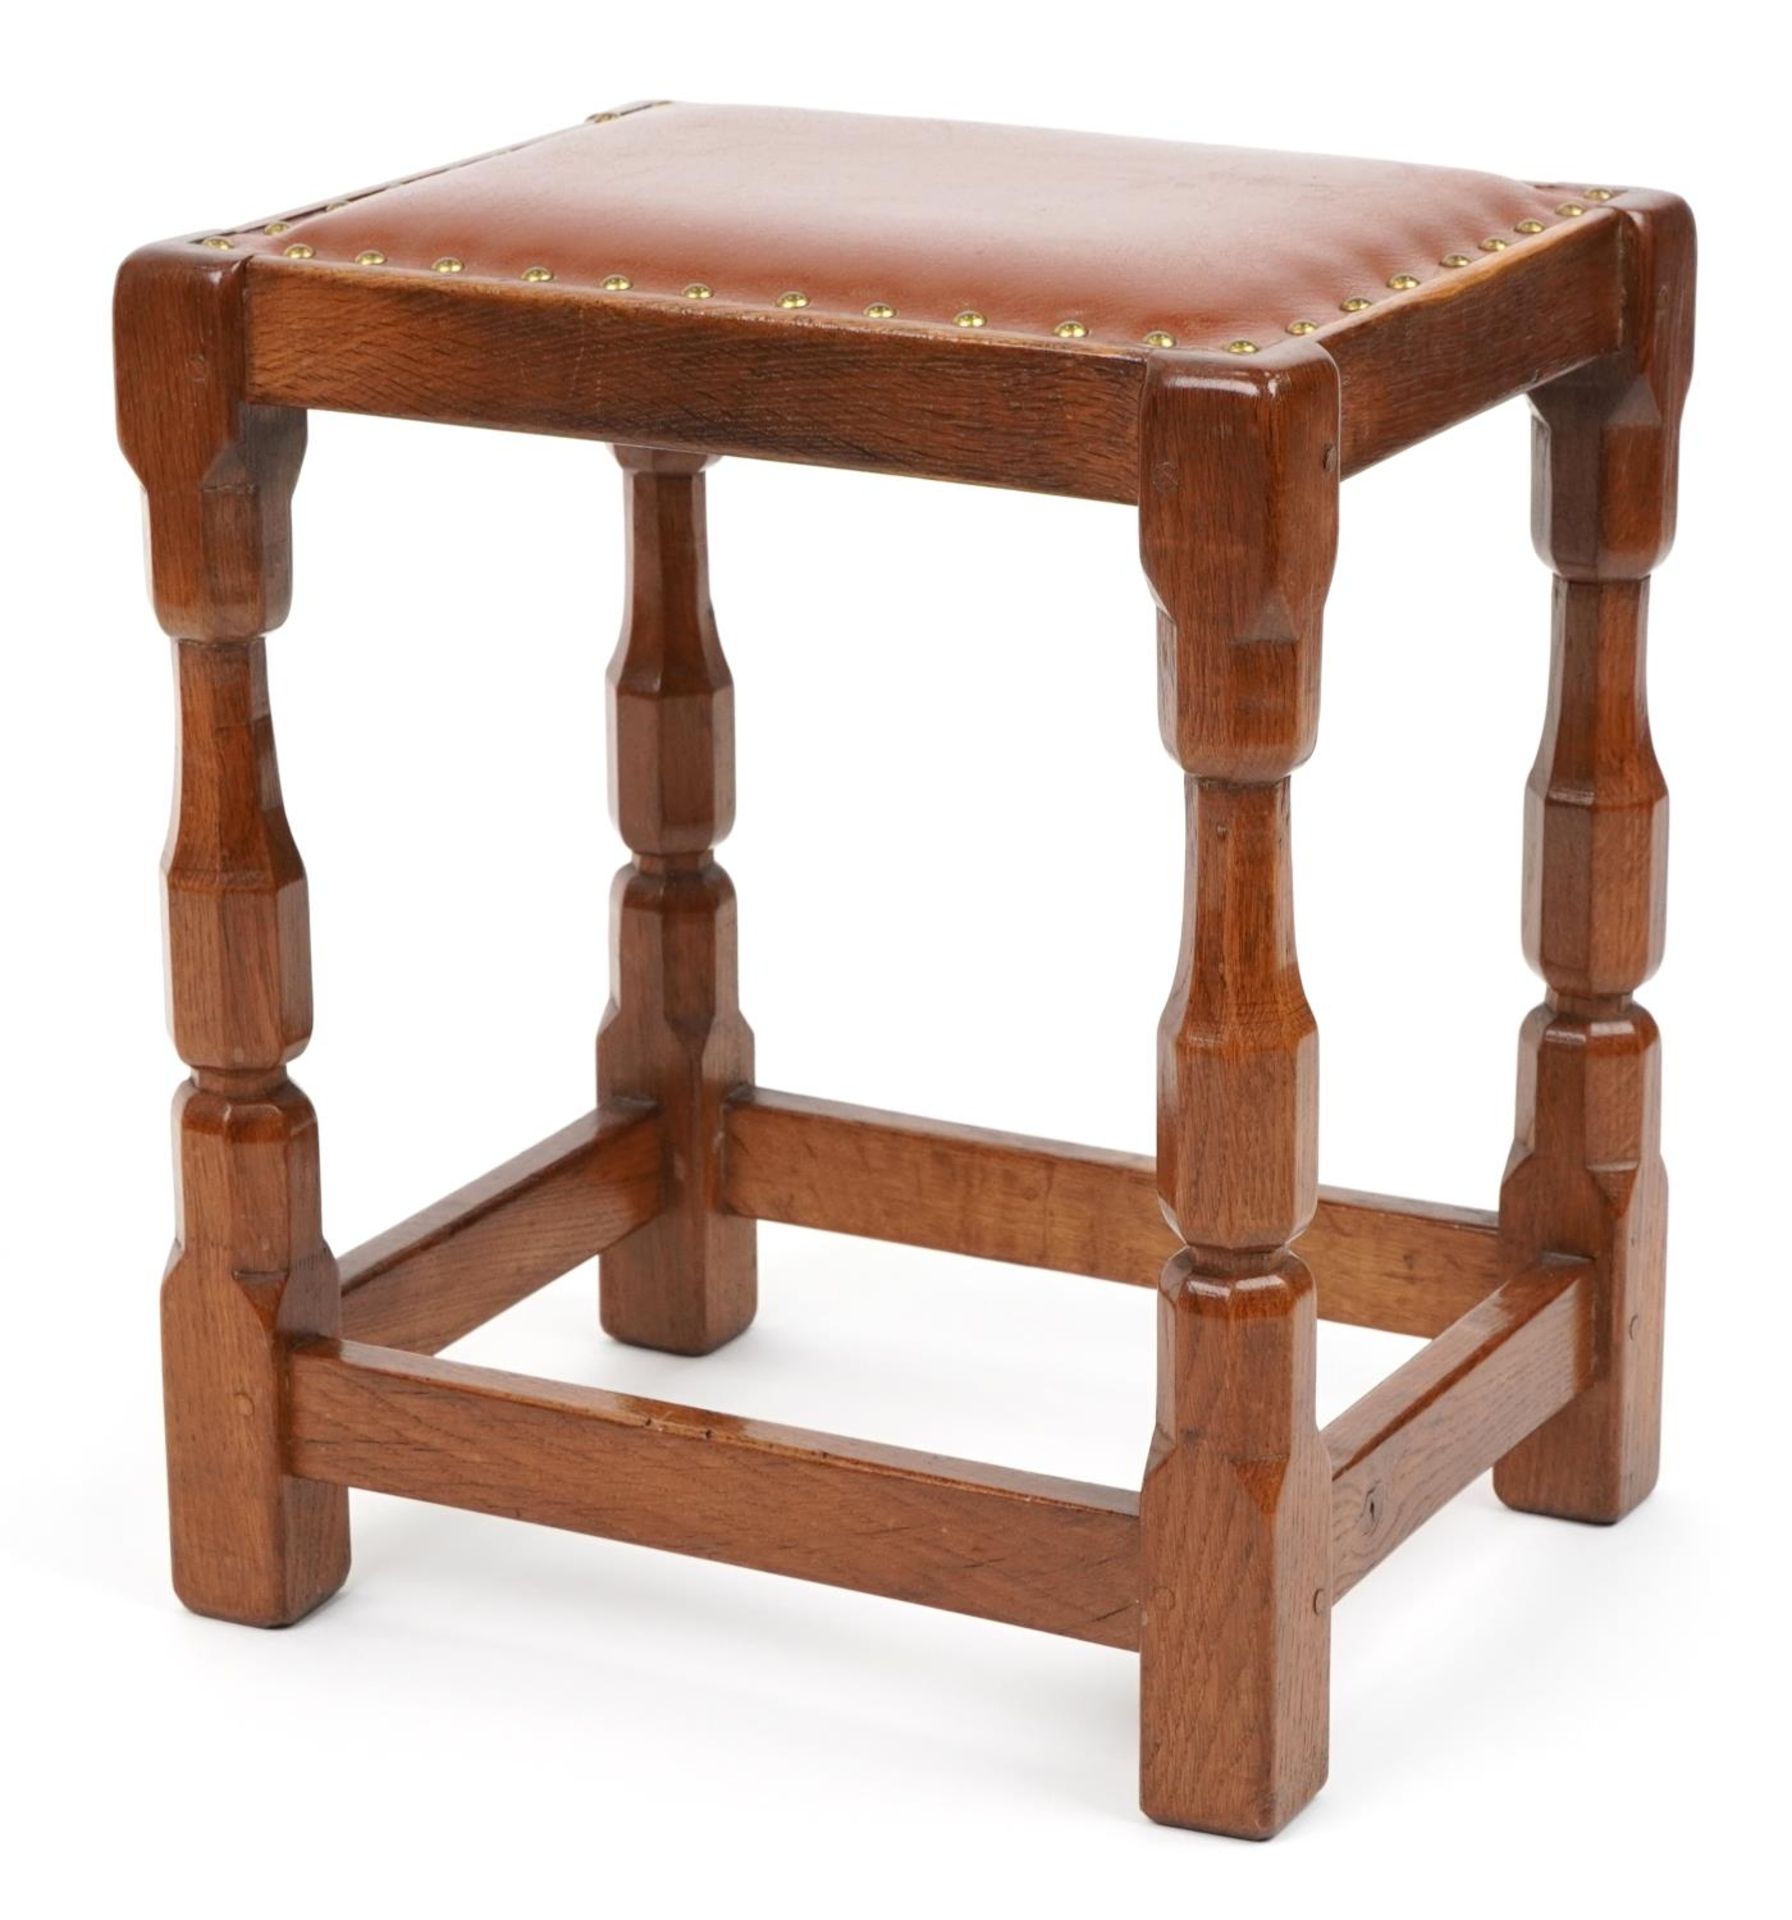 Syd Pollard, Arts & Crafts oak stool with brown leather upholstered seat, 45cm H x 40cm W x 32cm D :